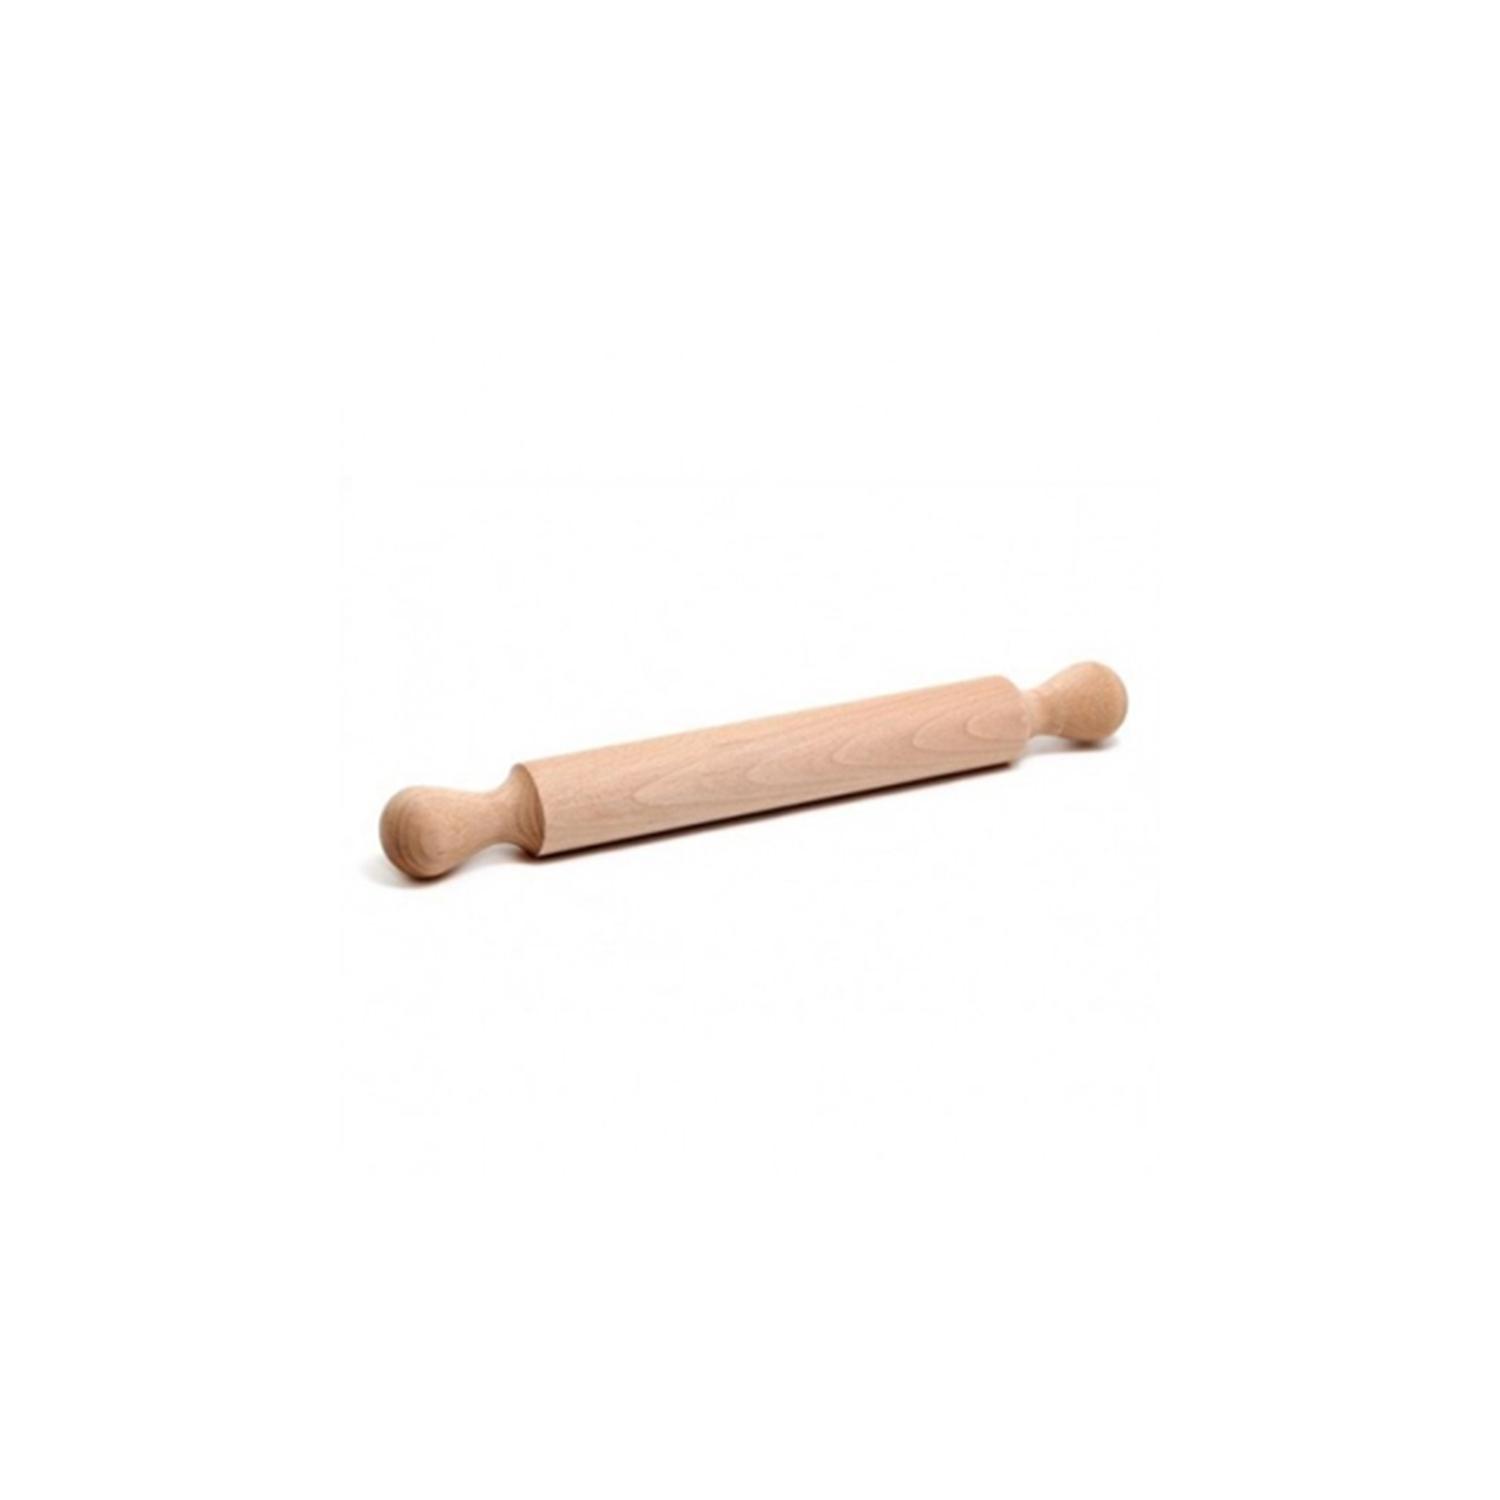 2X2X14 INCHES WOODEN ROLLING PIN PLAIN